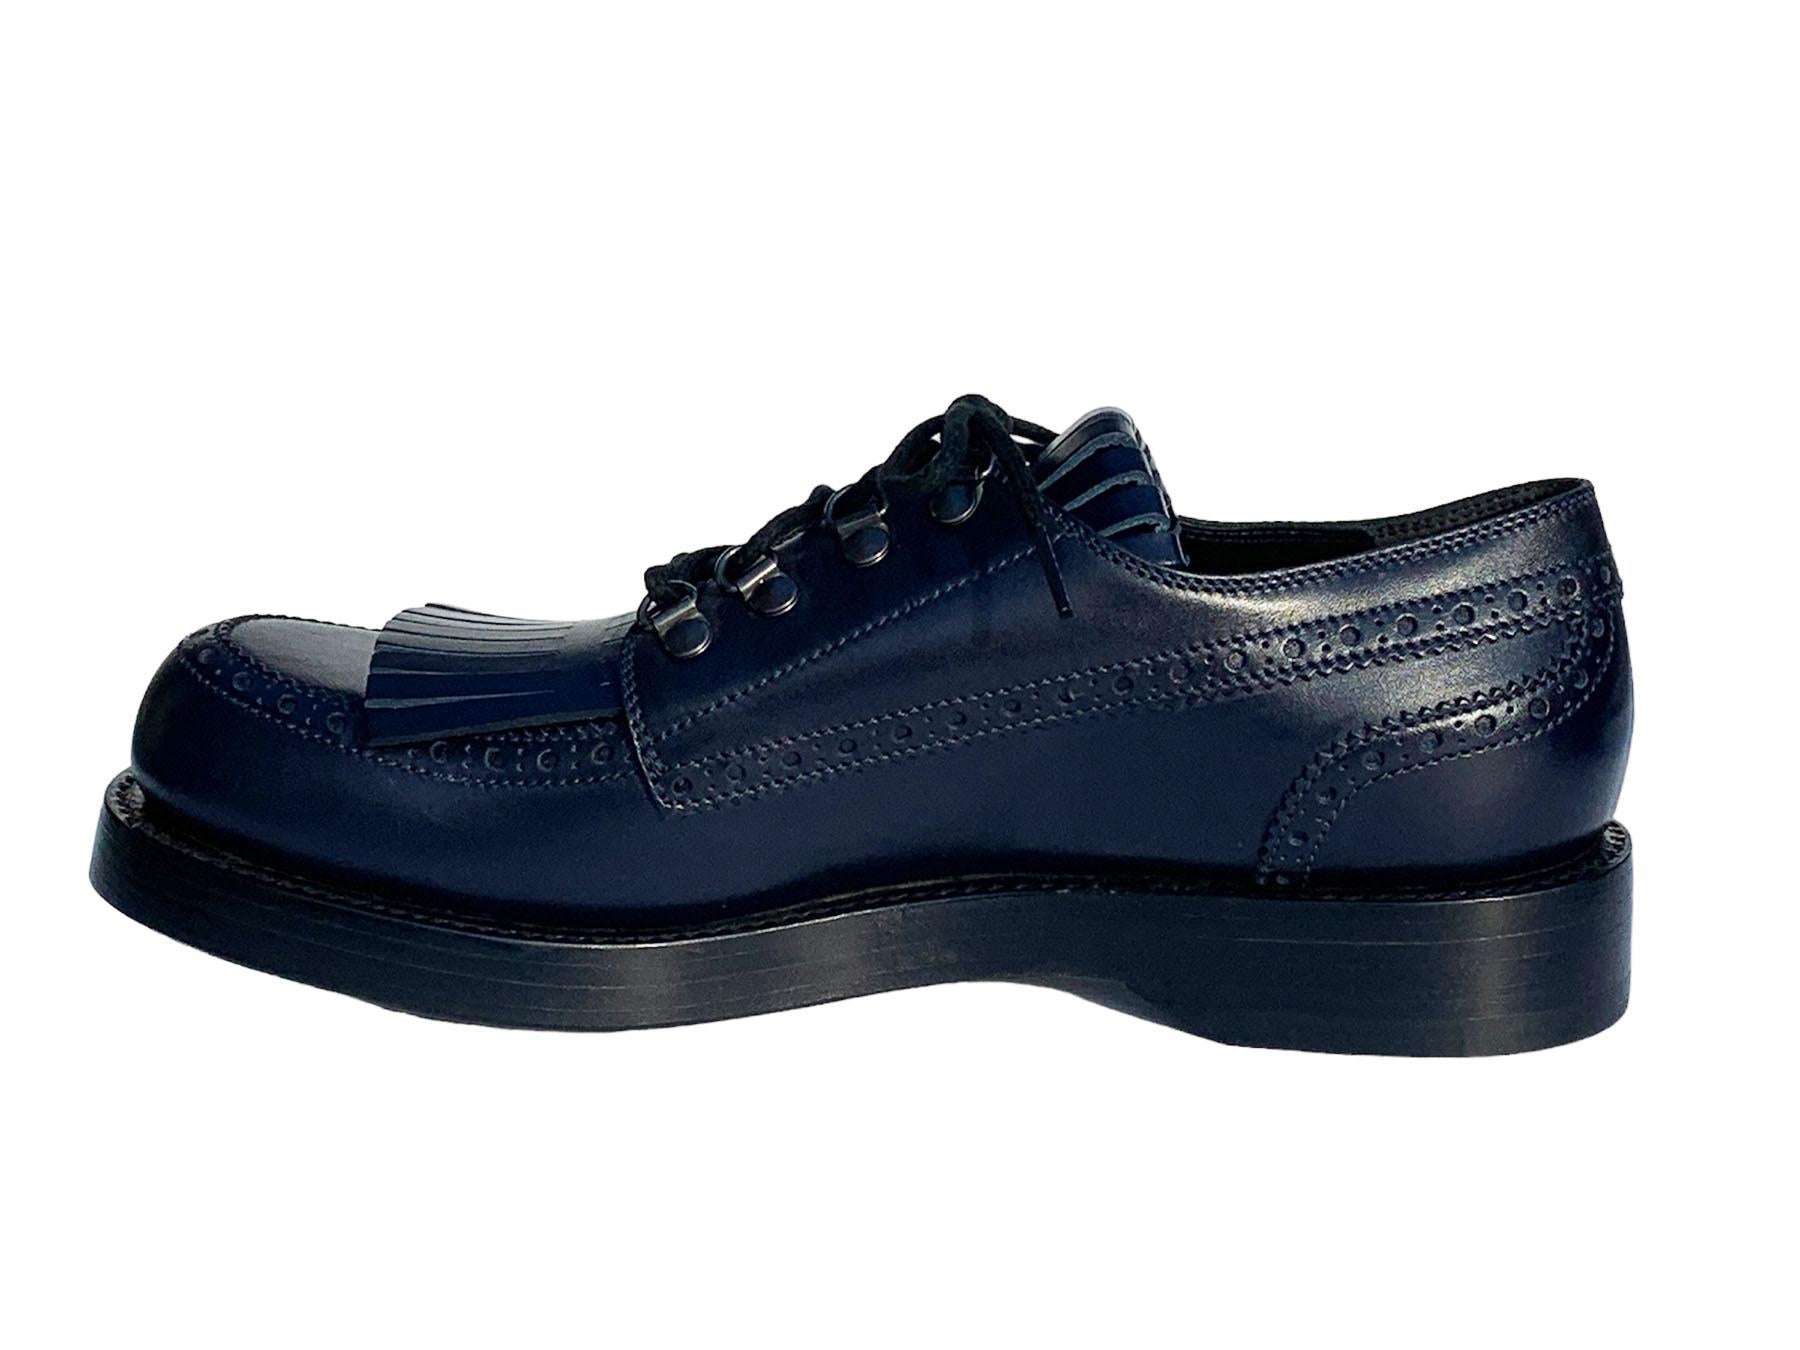 New Gucci Men's Leather Fringed Brogue Lace-Up Shoes Dark Blue US 10 For Sale 1